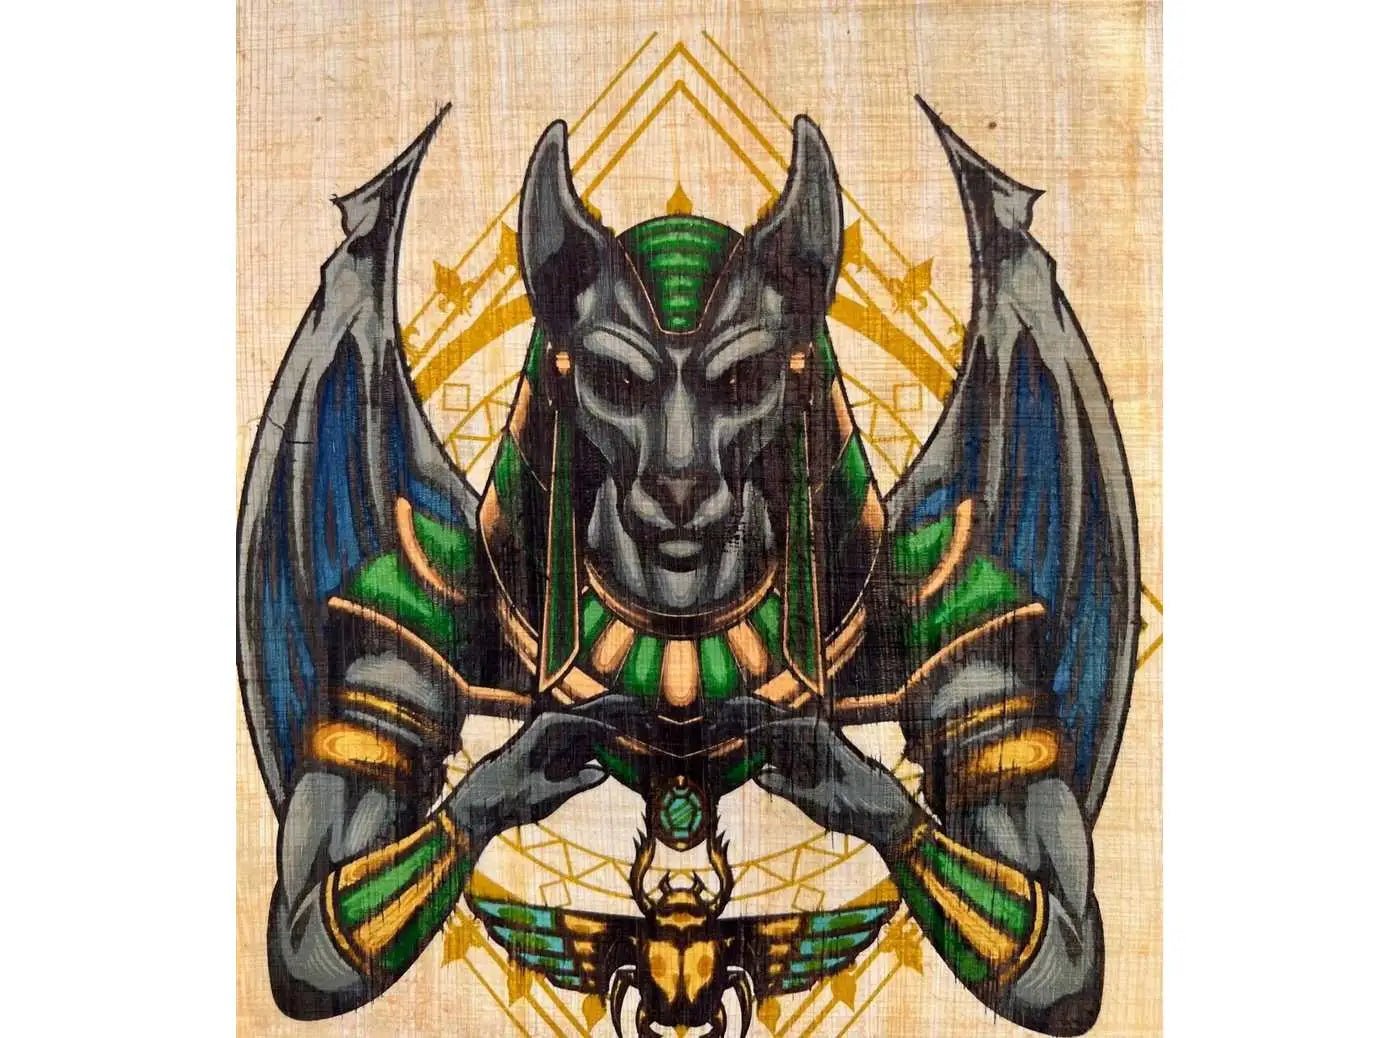 Anubis Illustration Vector Printing on Authentic Egyptian Vintage Papyrus Paper